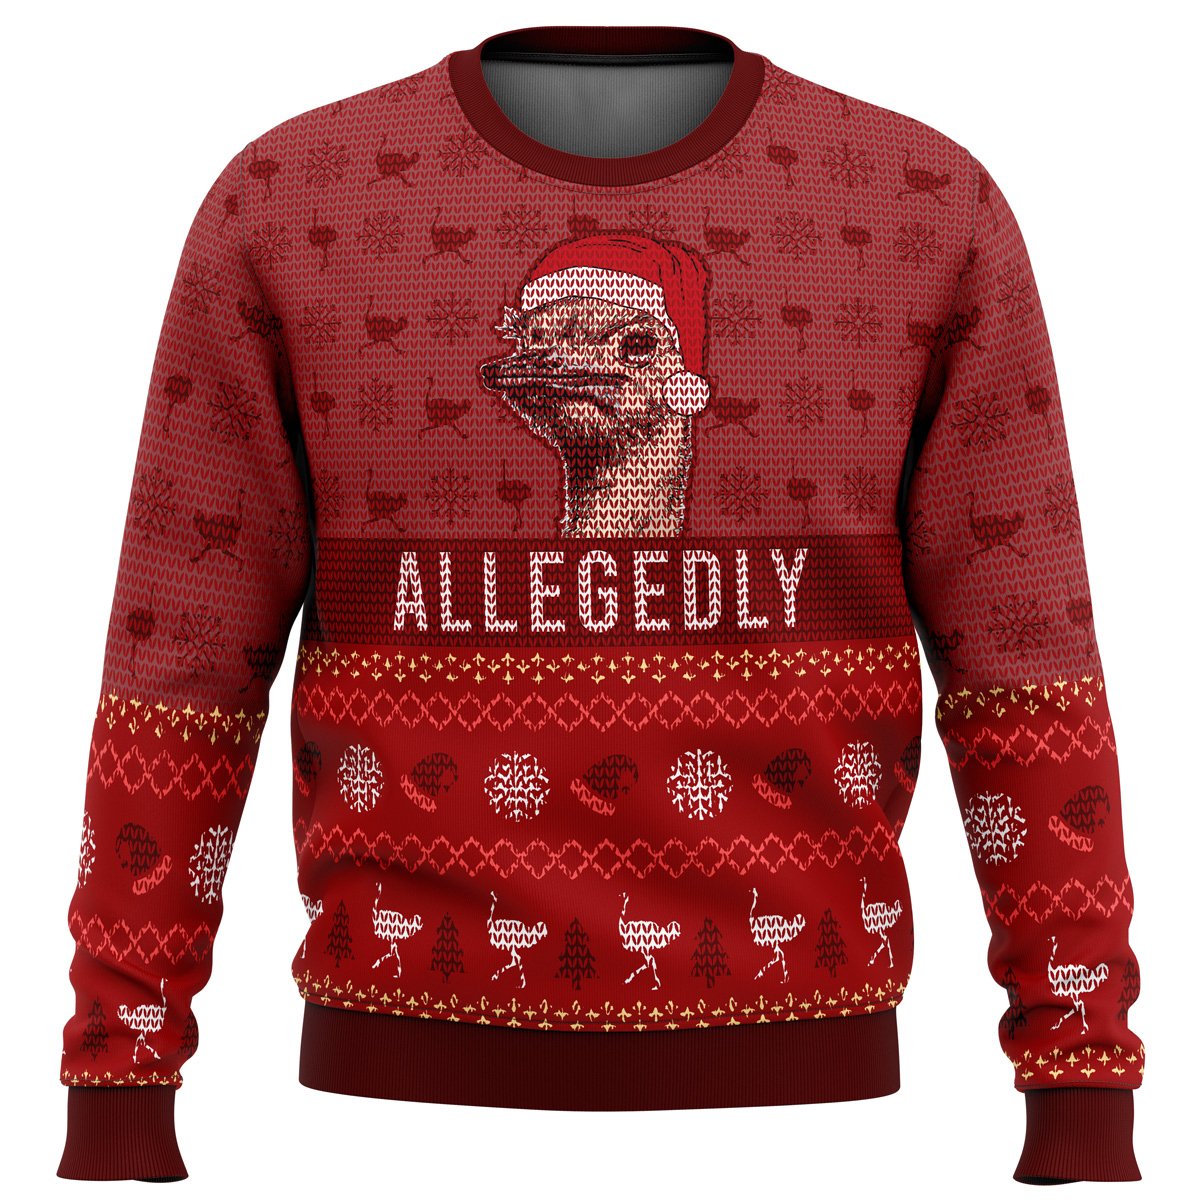 Letterkenny Allegedly Ugly Christmas Sweater